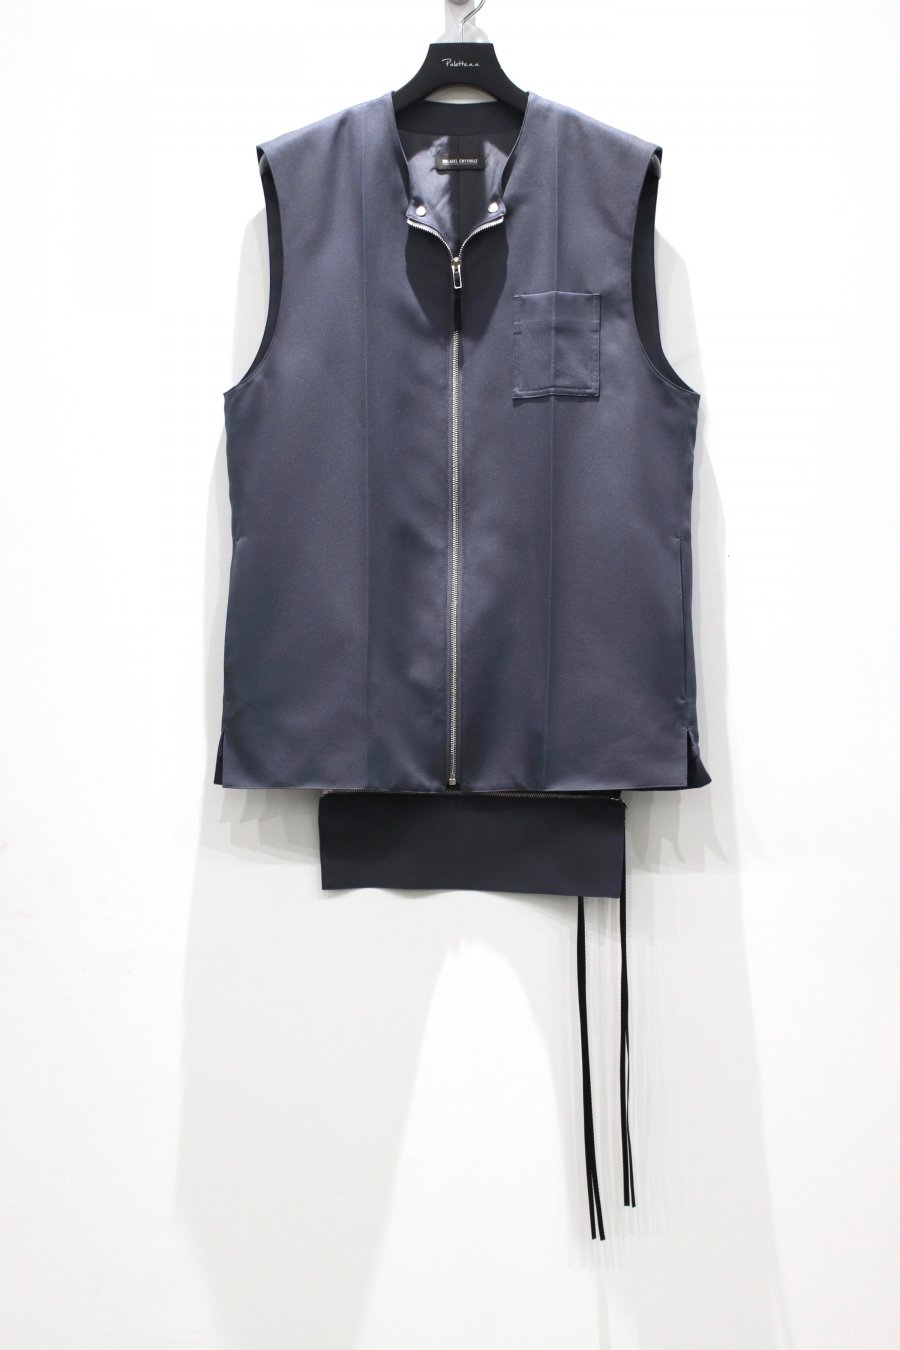 NULABEL  WORK DRESS VEST<img class='new_mark_img2' src='https://img.shop-pro.jp/img/new/icons15.gif' style='border:none;display:inline;margin:0px;padding:0px;width:auto;' />